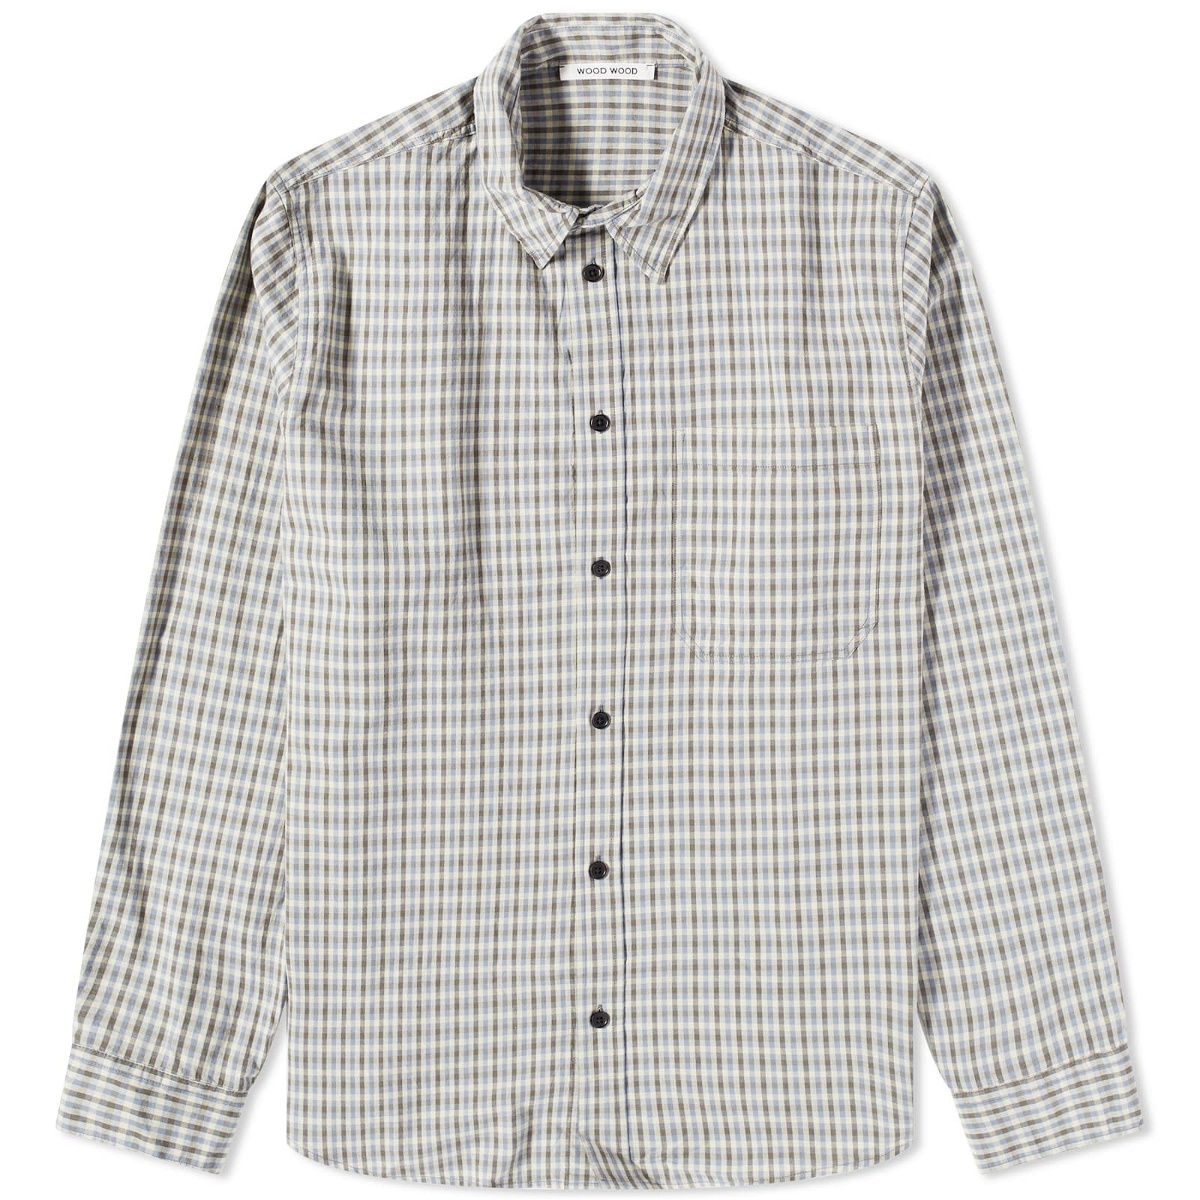 Photo: Wood Wood Men's Aster Flannel Shirt in Blue Grey